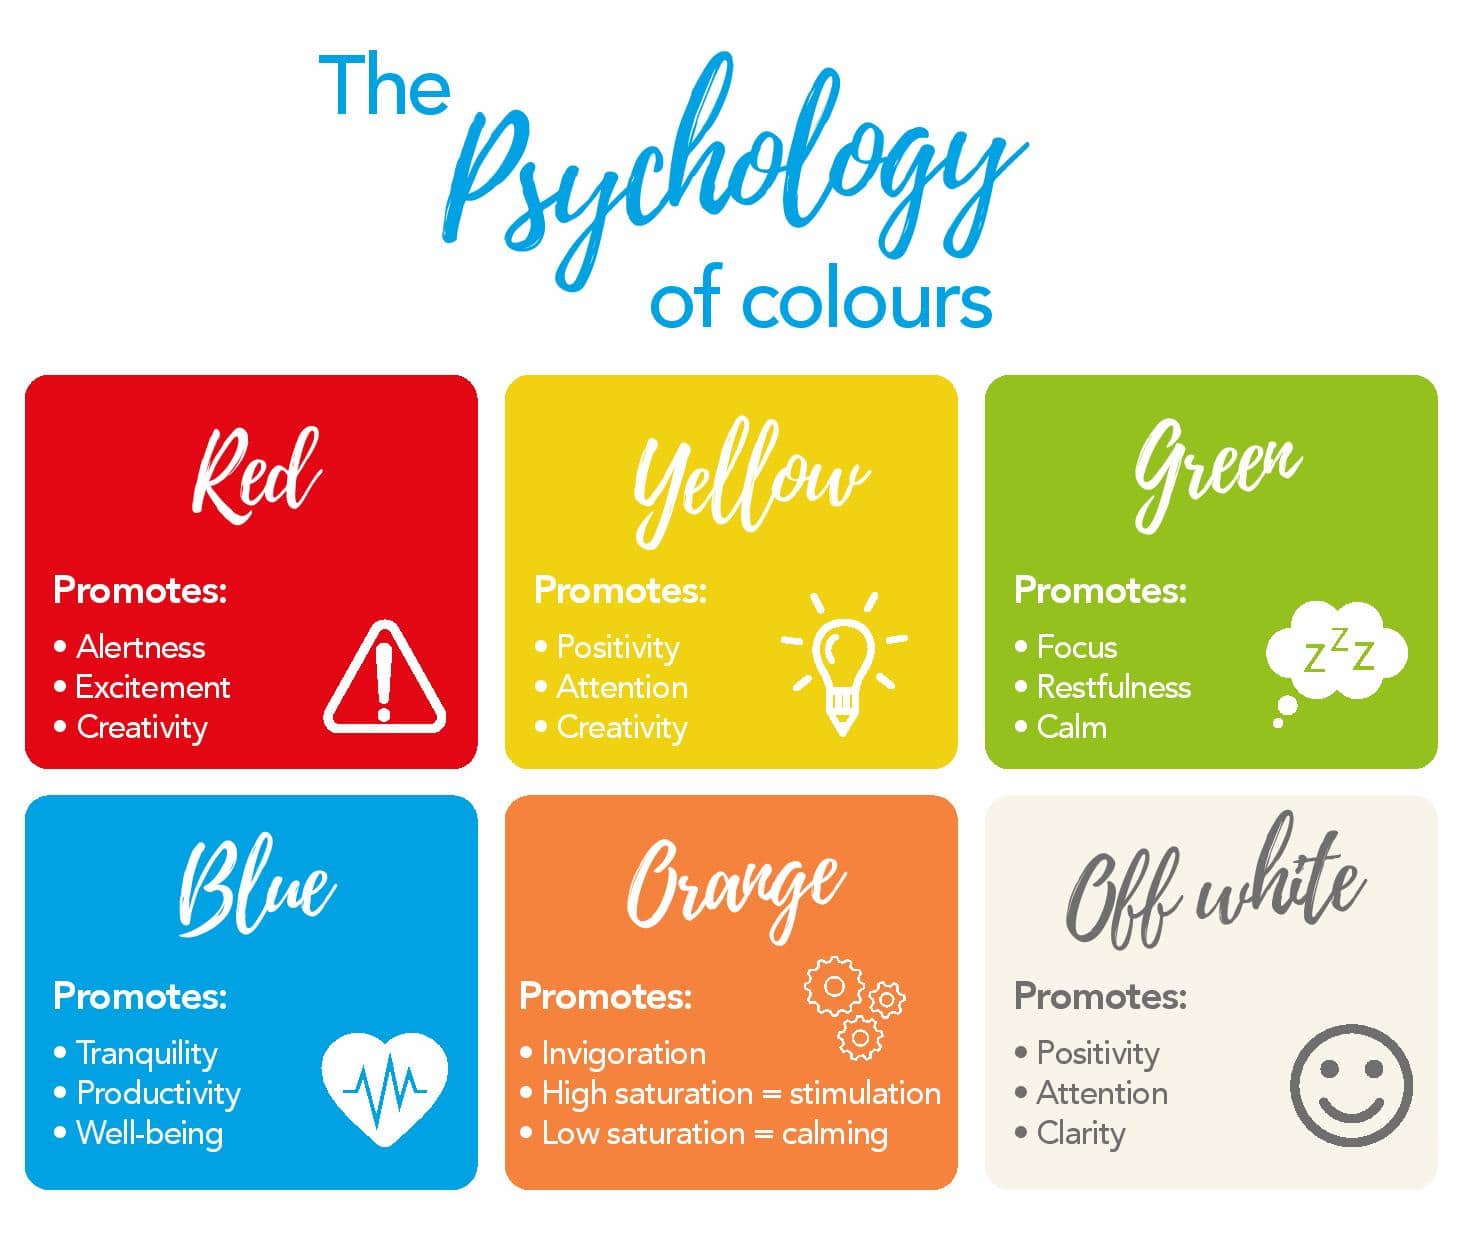 What color is best for learning?